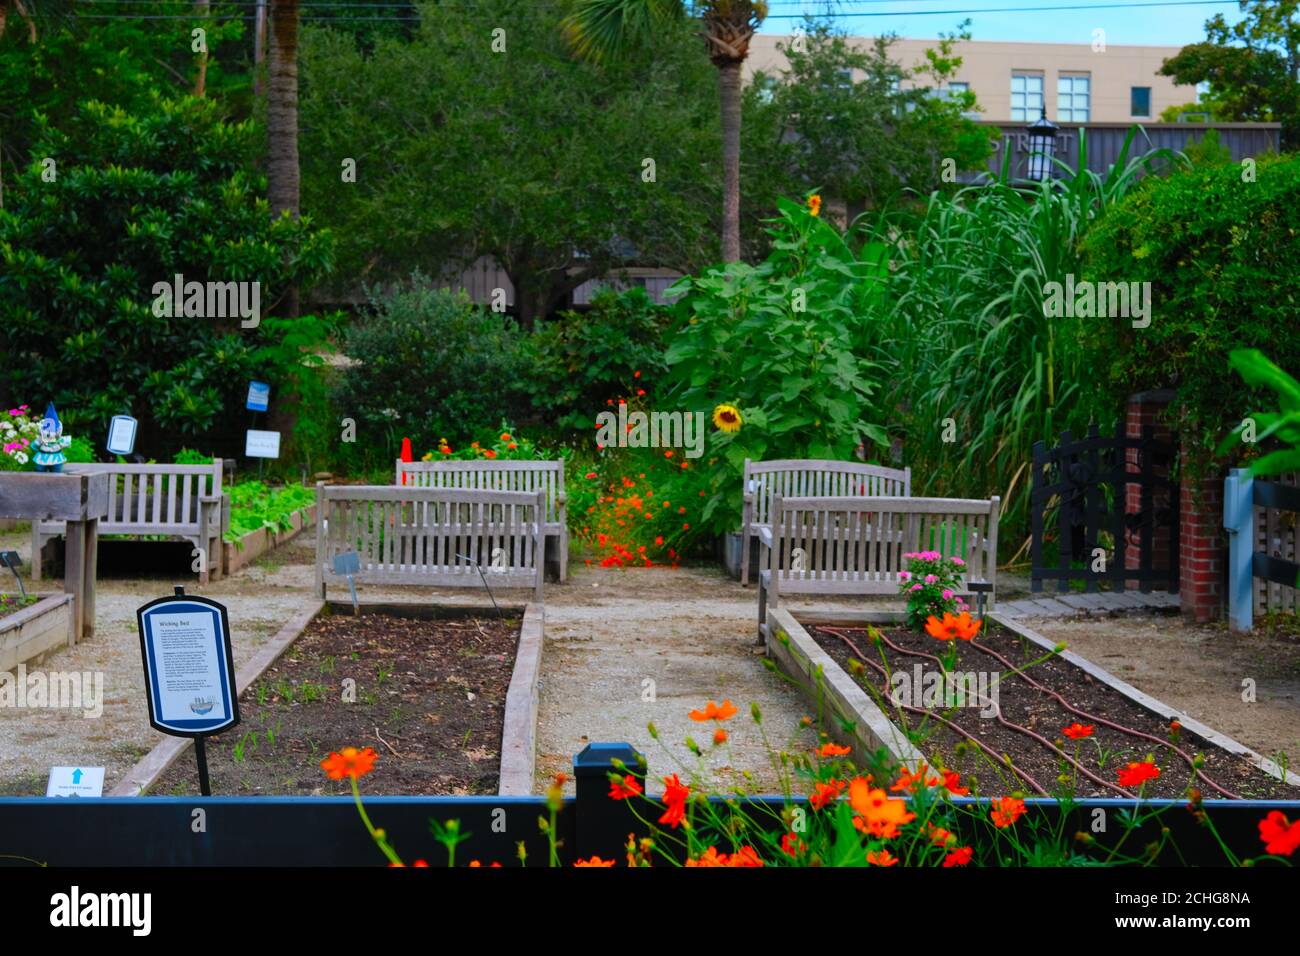 Urban Rain Gardens Are Very Popular (There Are 4 in My Immediate Area) with Volunteers to Plant and Nurse the Produce & Flowers with Many Sharing. Stock Photo